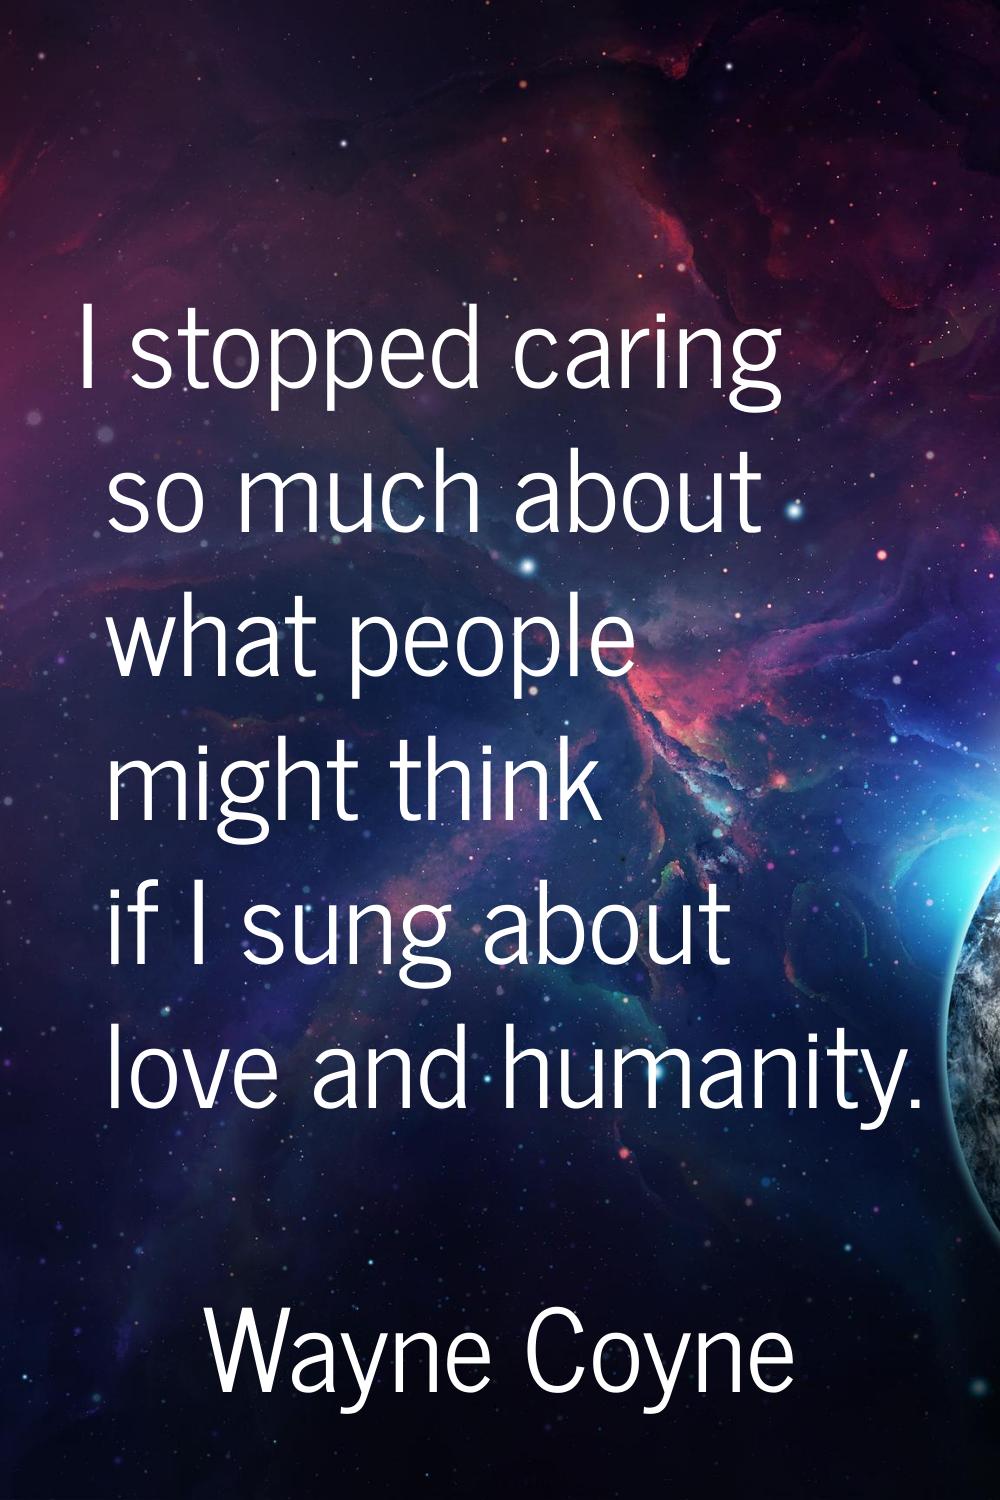 I stopped caring so much about what people might think if I sung about love and humanity.